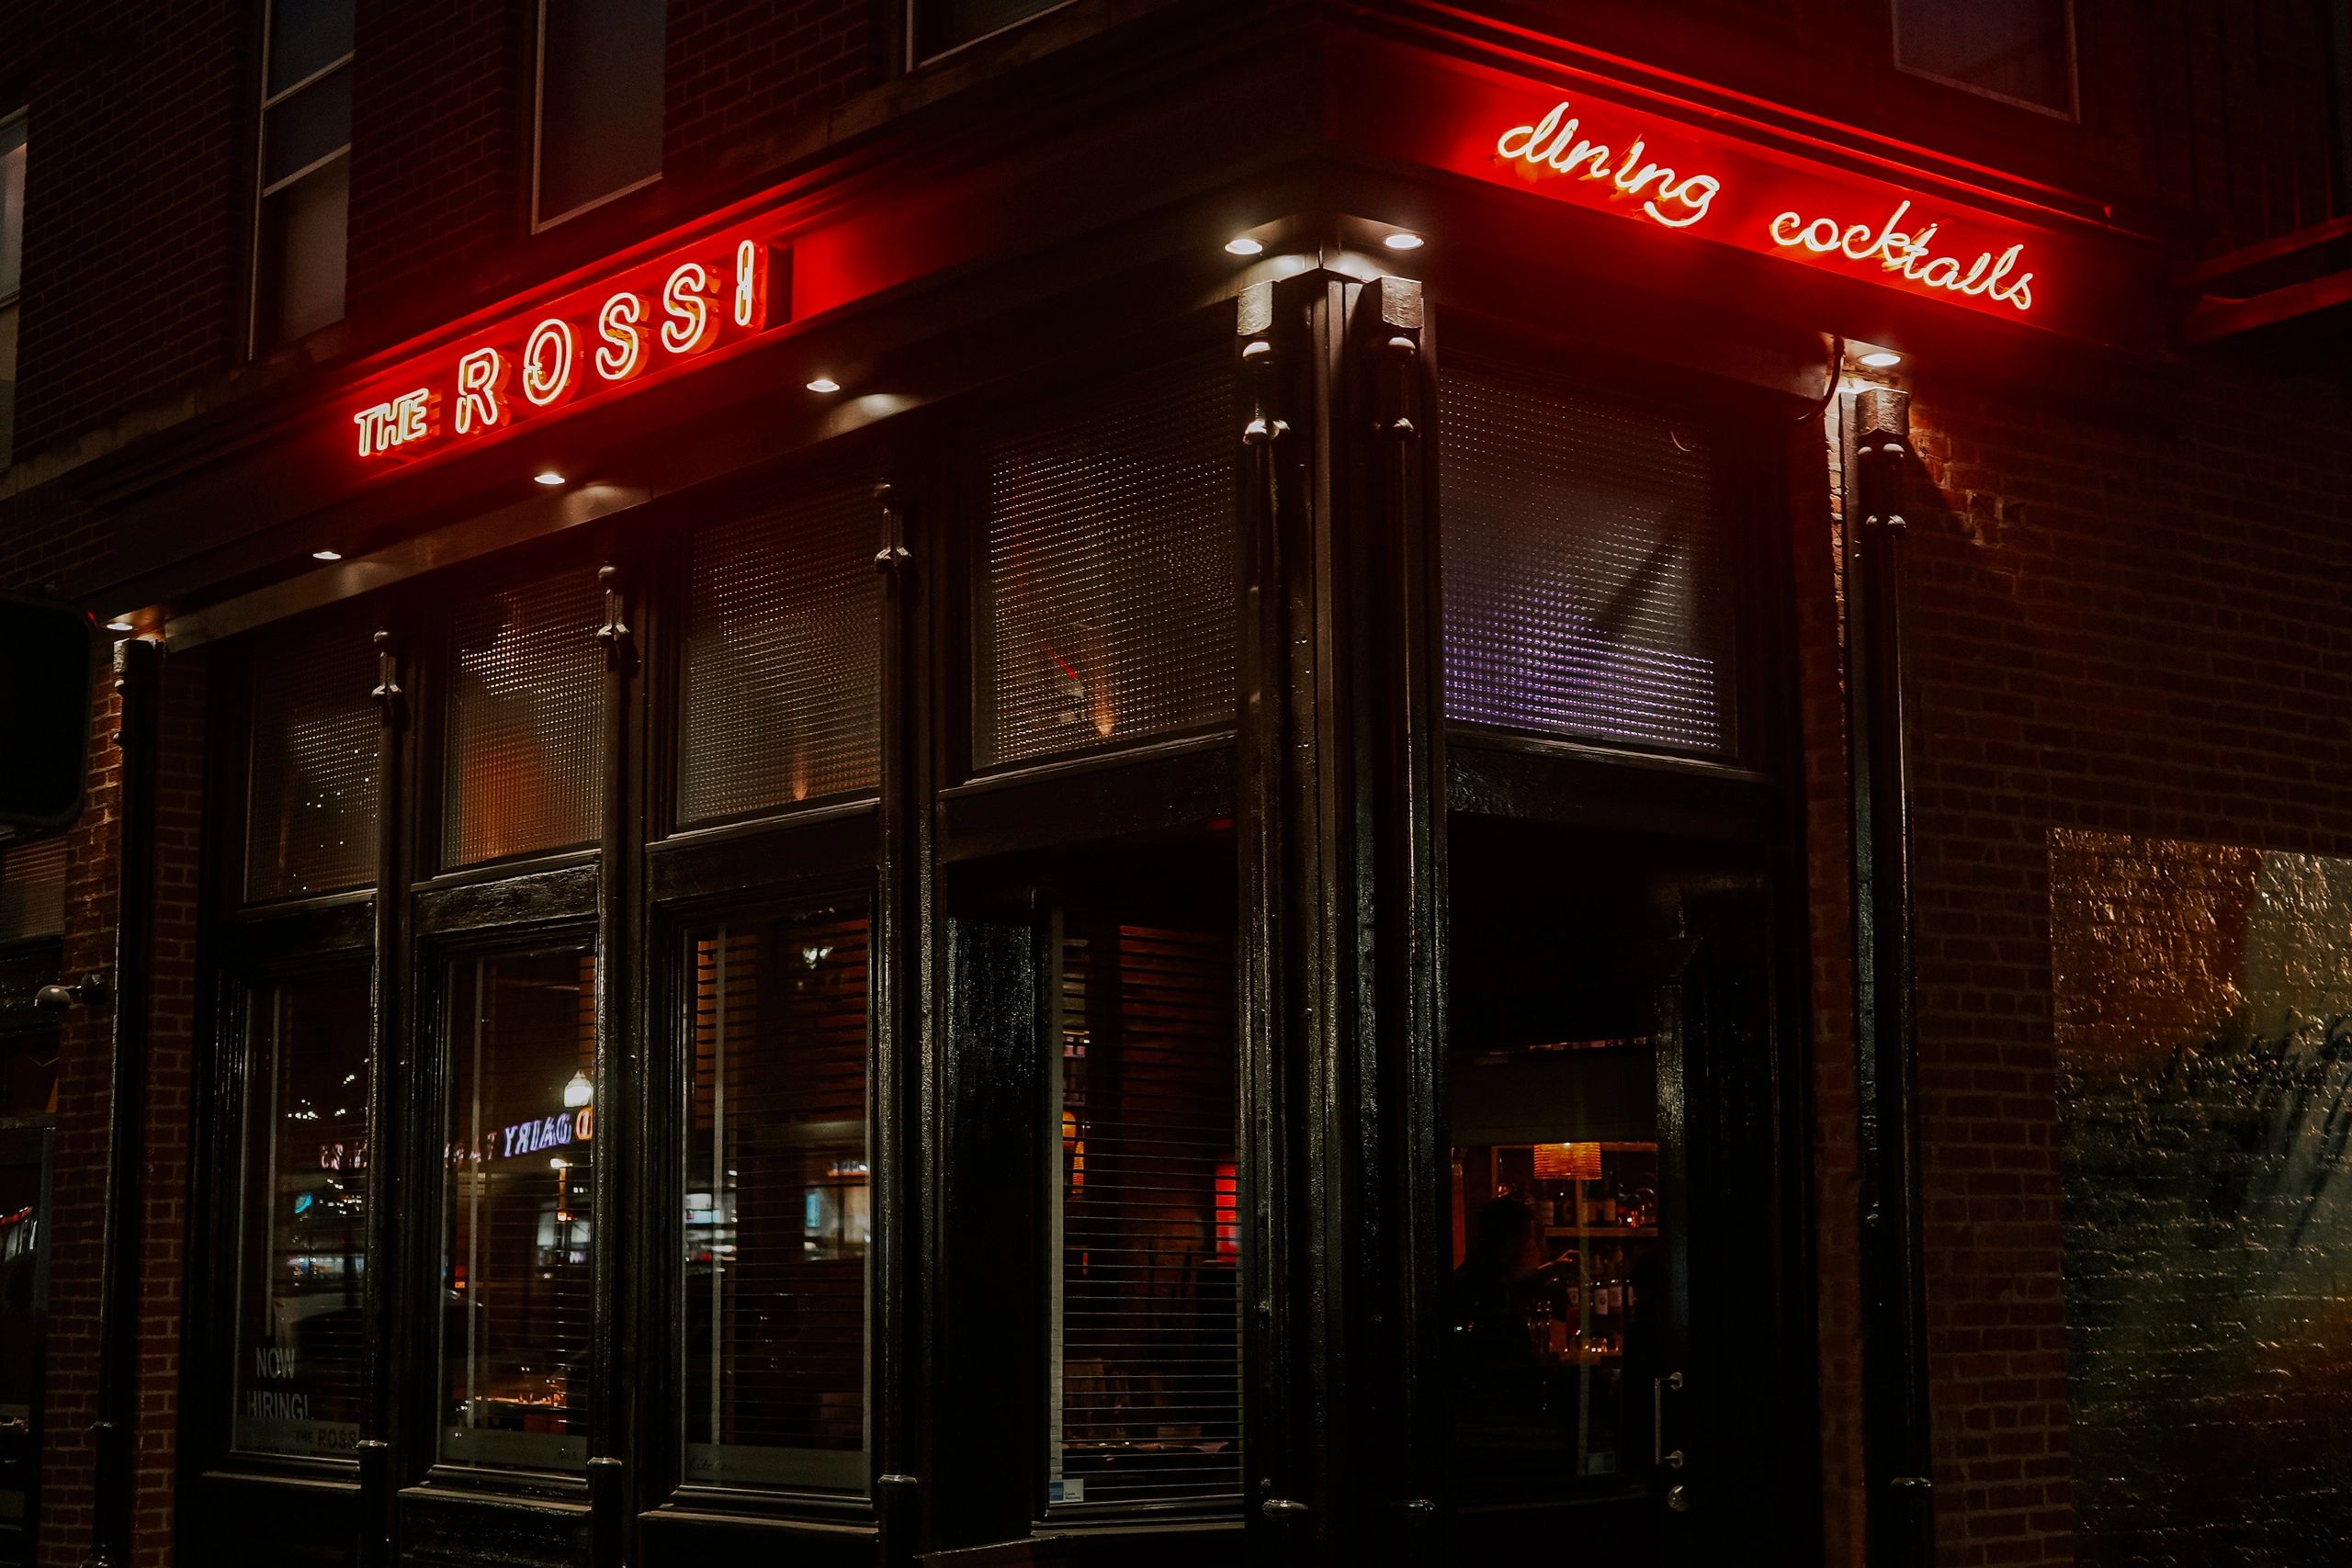 the rossi bar and kitchen columbus